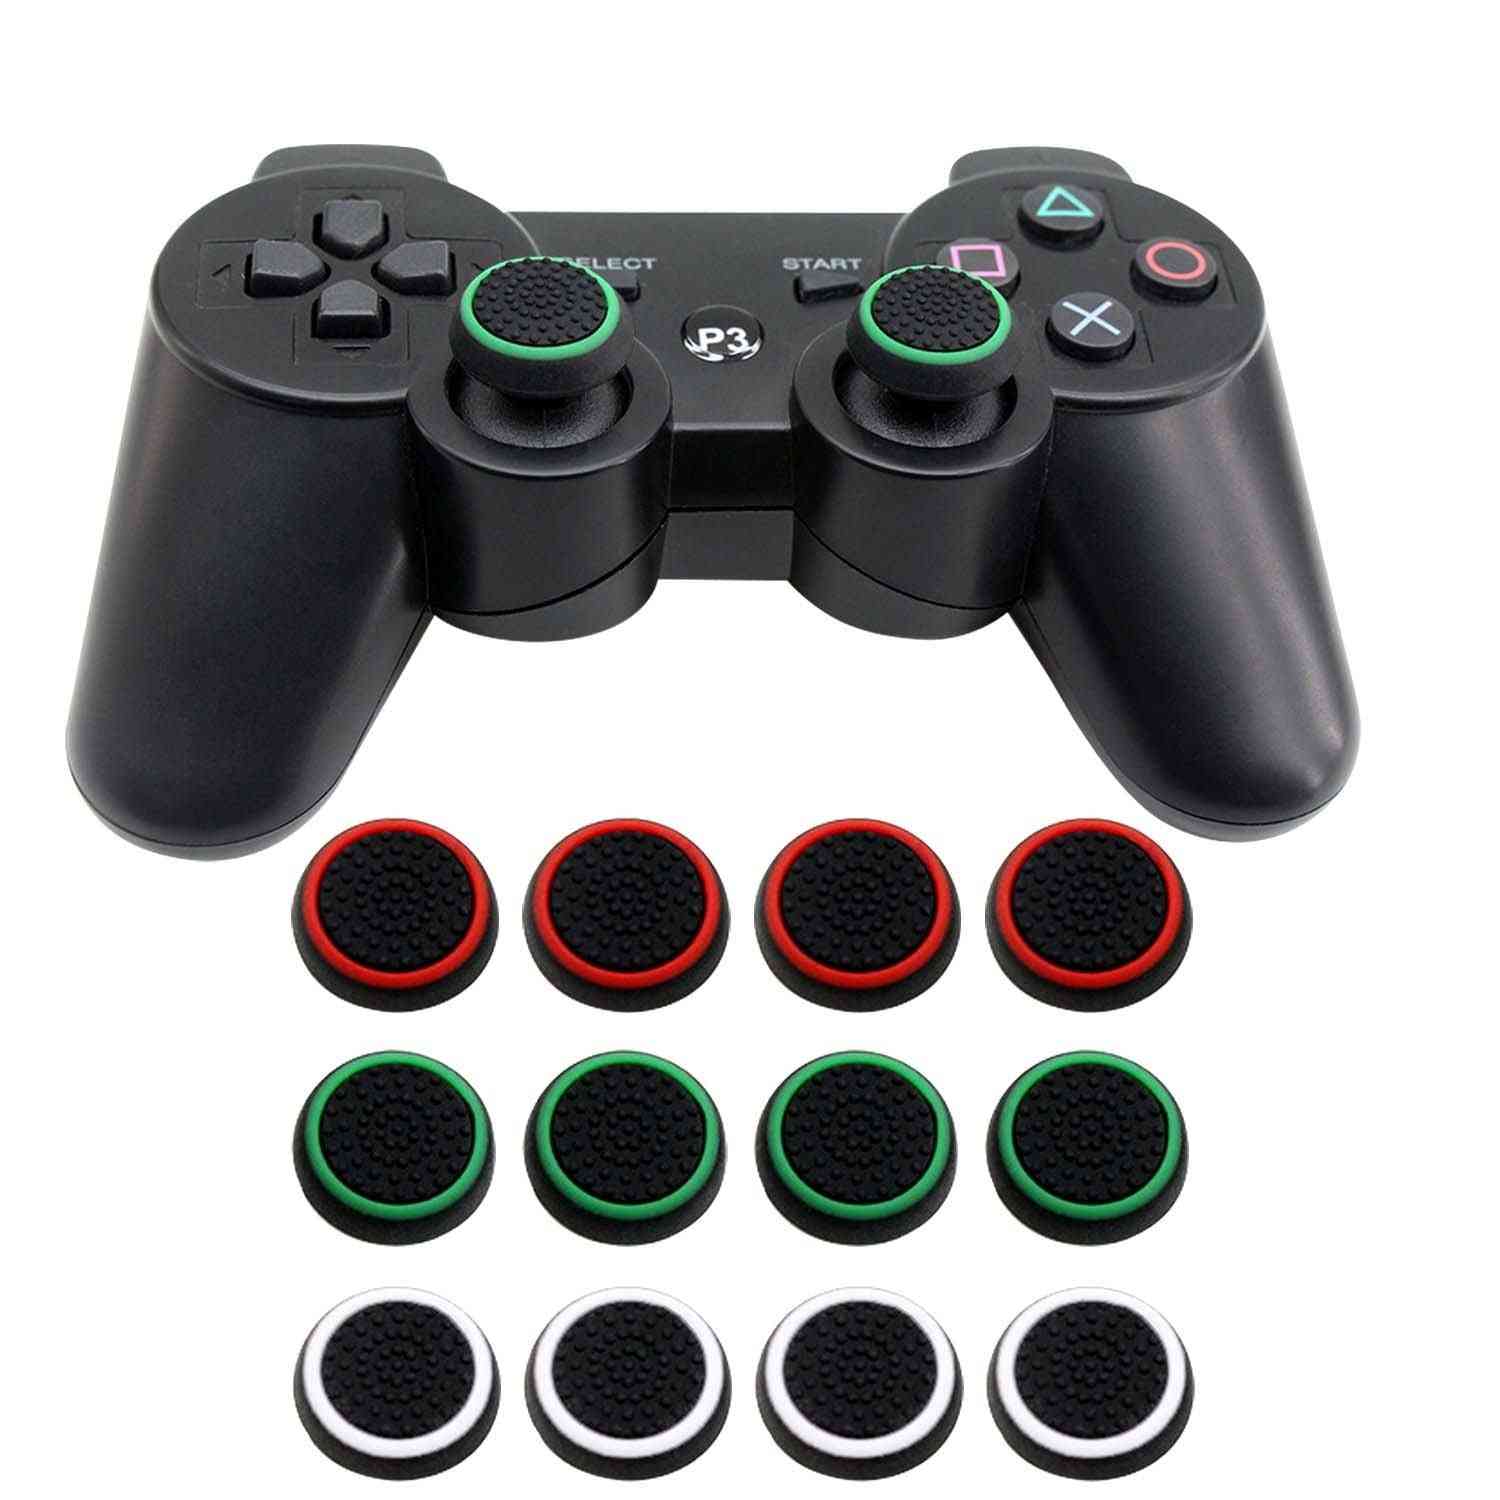 Soft Silicone, Anti-slip Thumb Grip Stick Cover - Case Skin For Sony Play Station